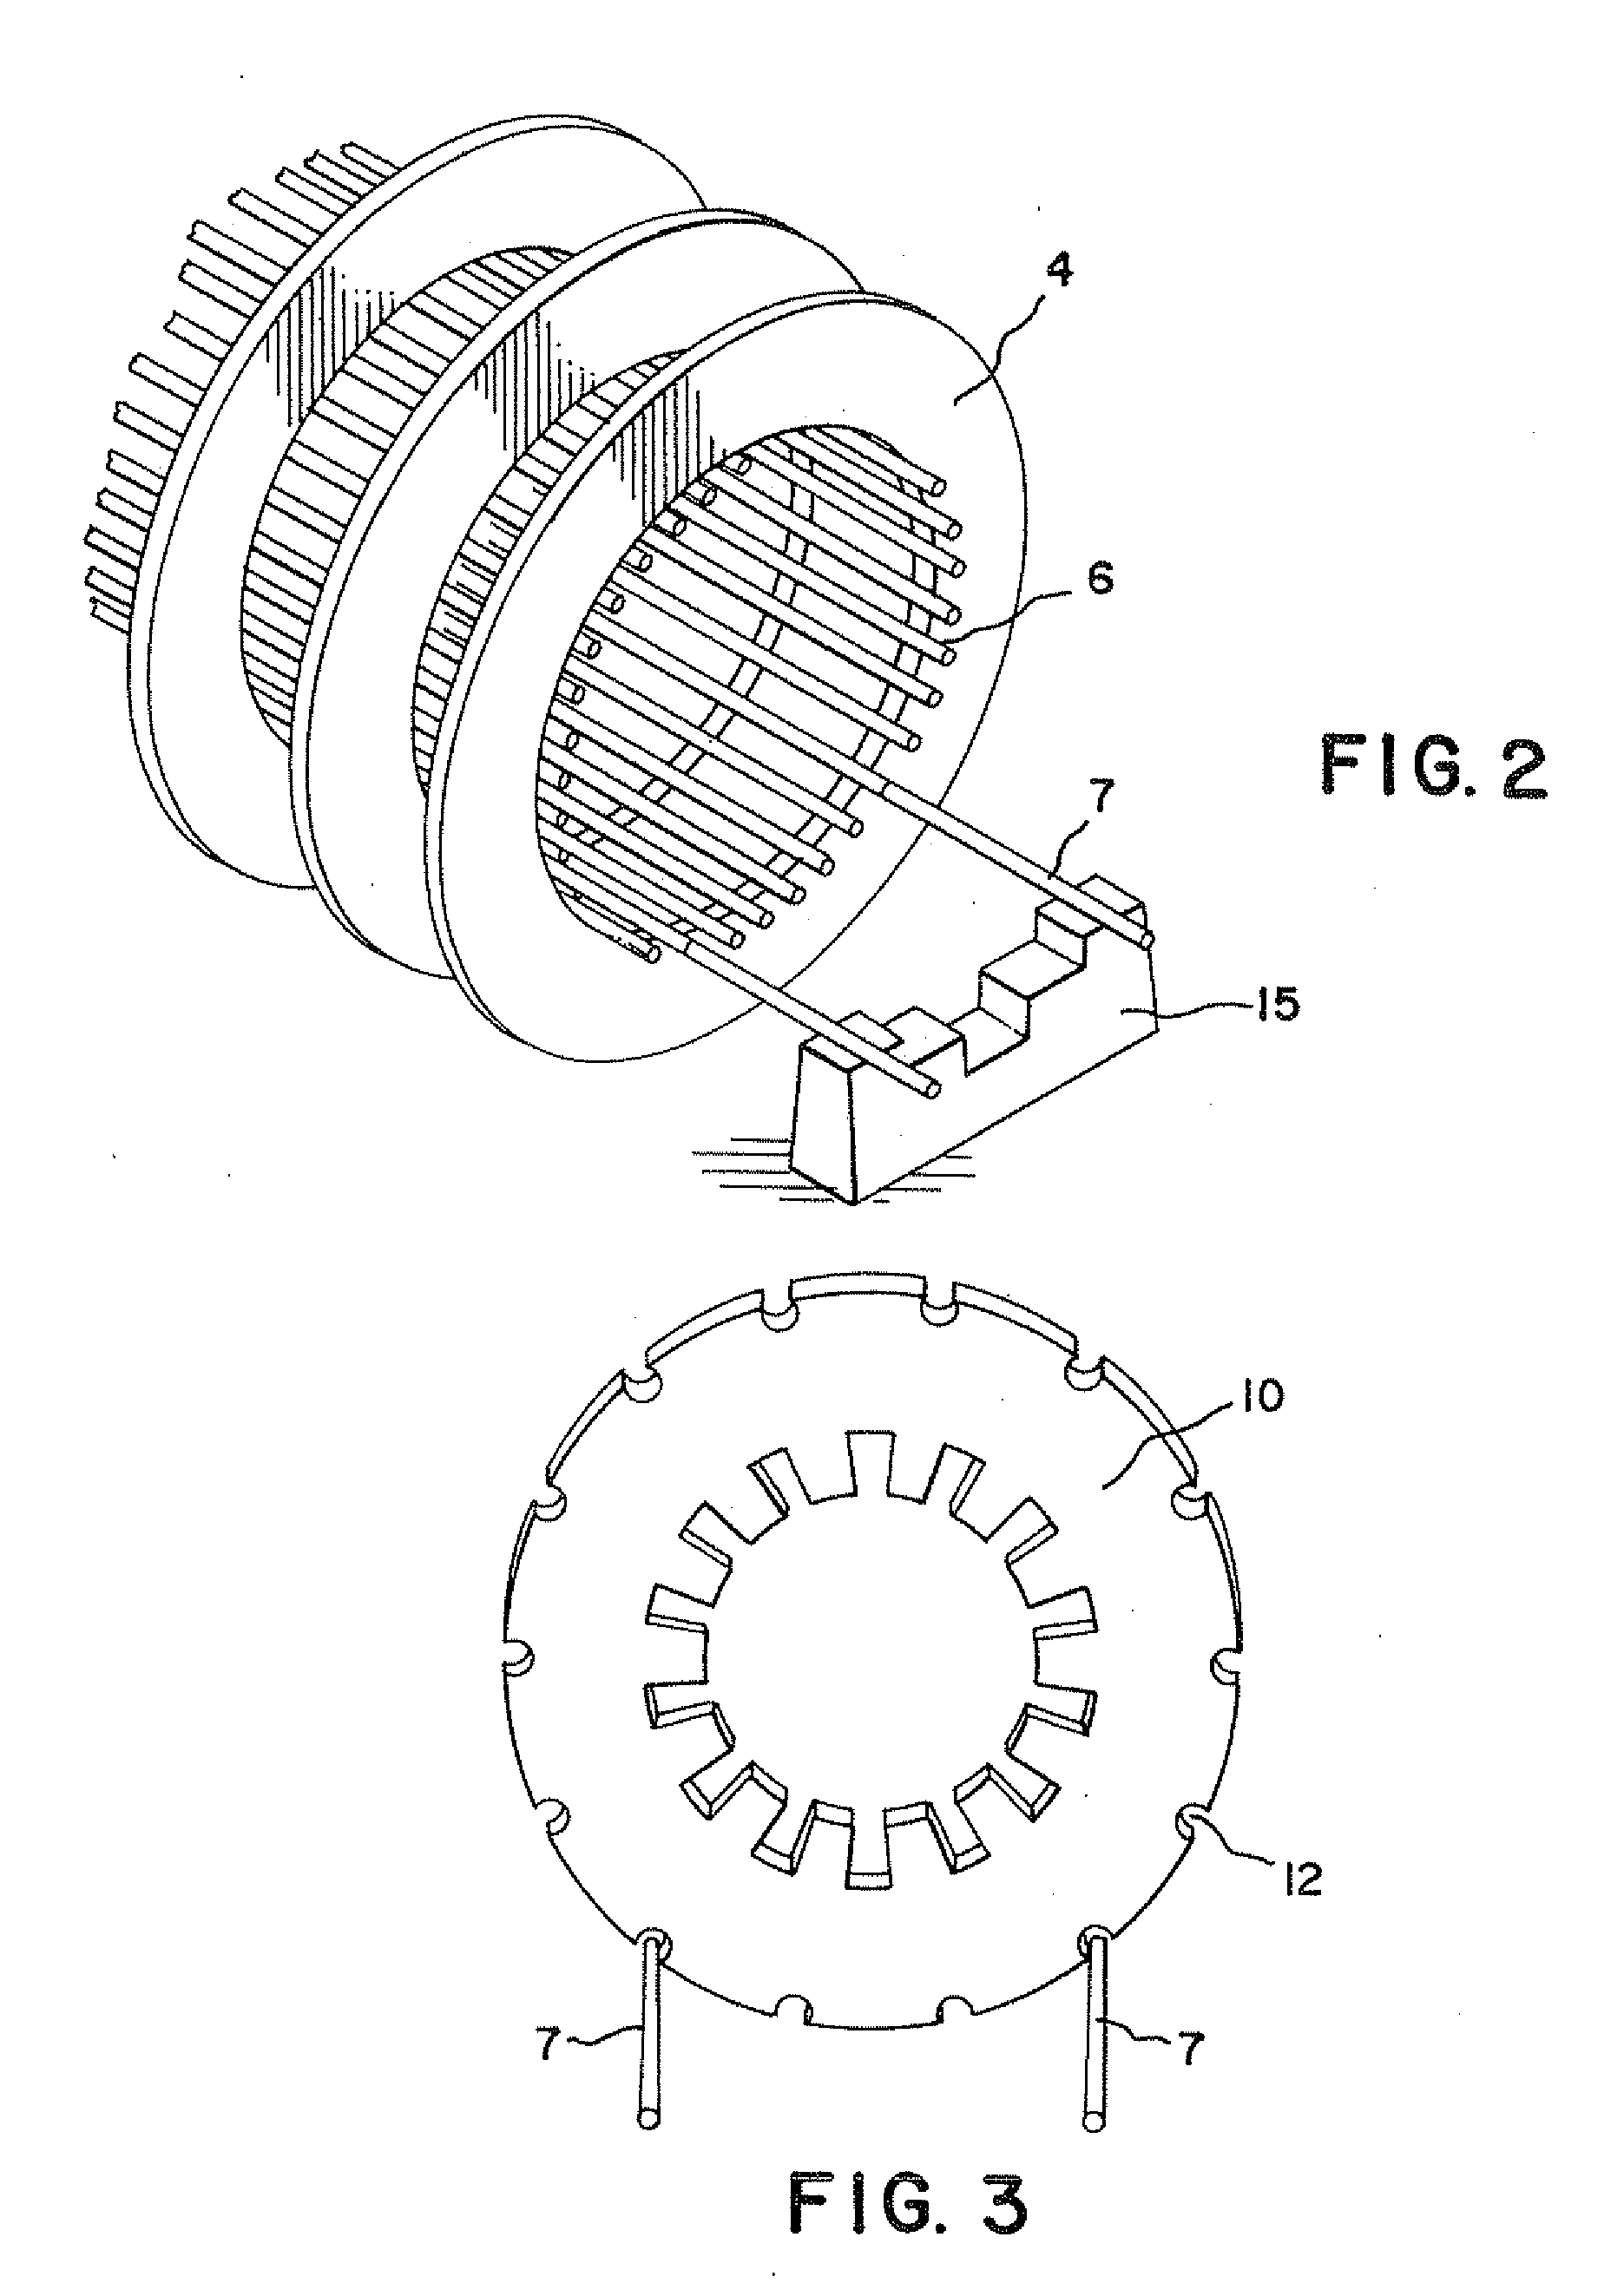 Horizontal Assembly of Stator Core Using Keybar Extensions